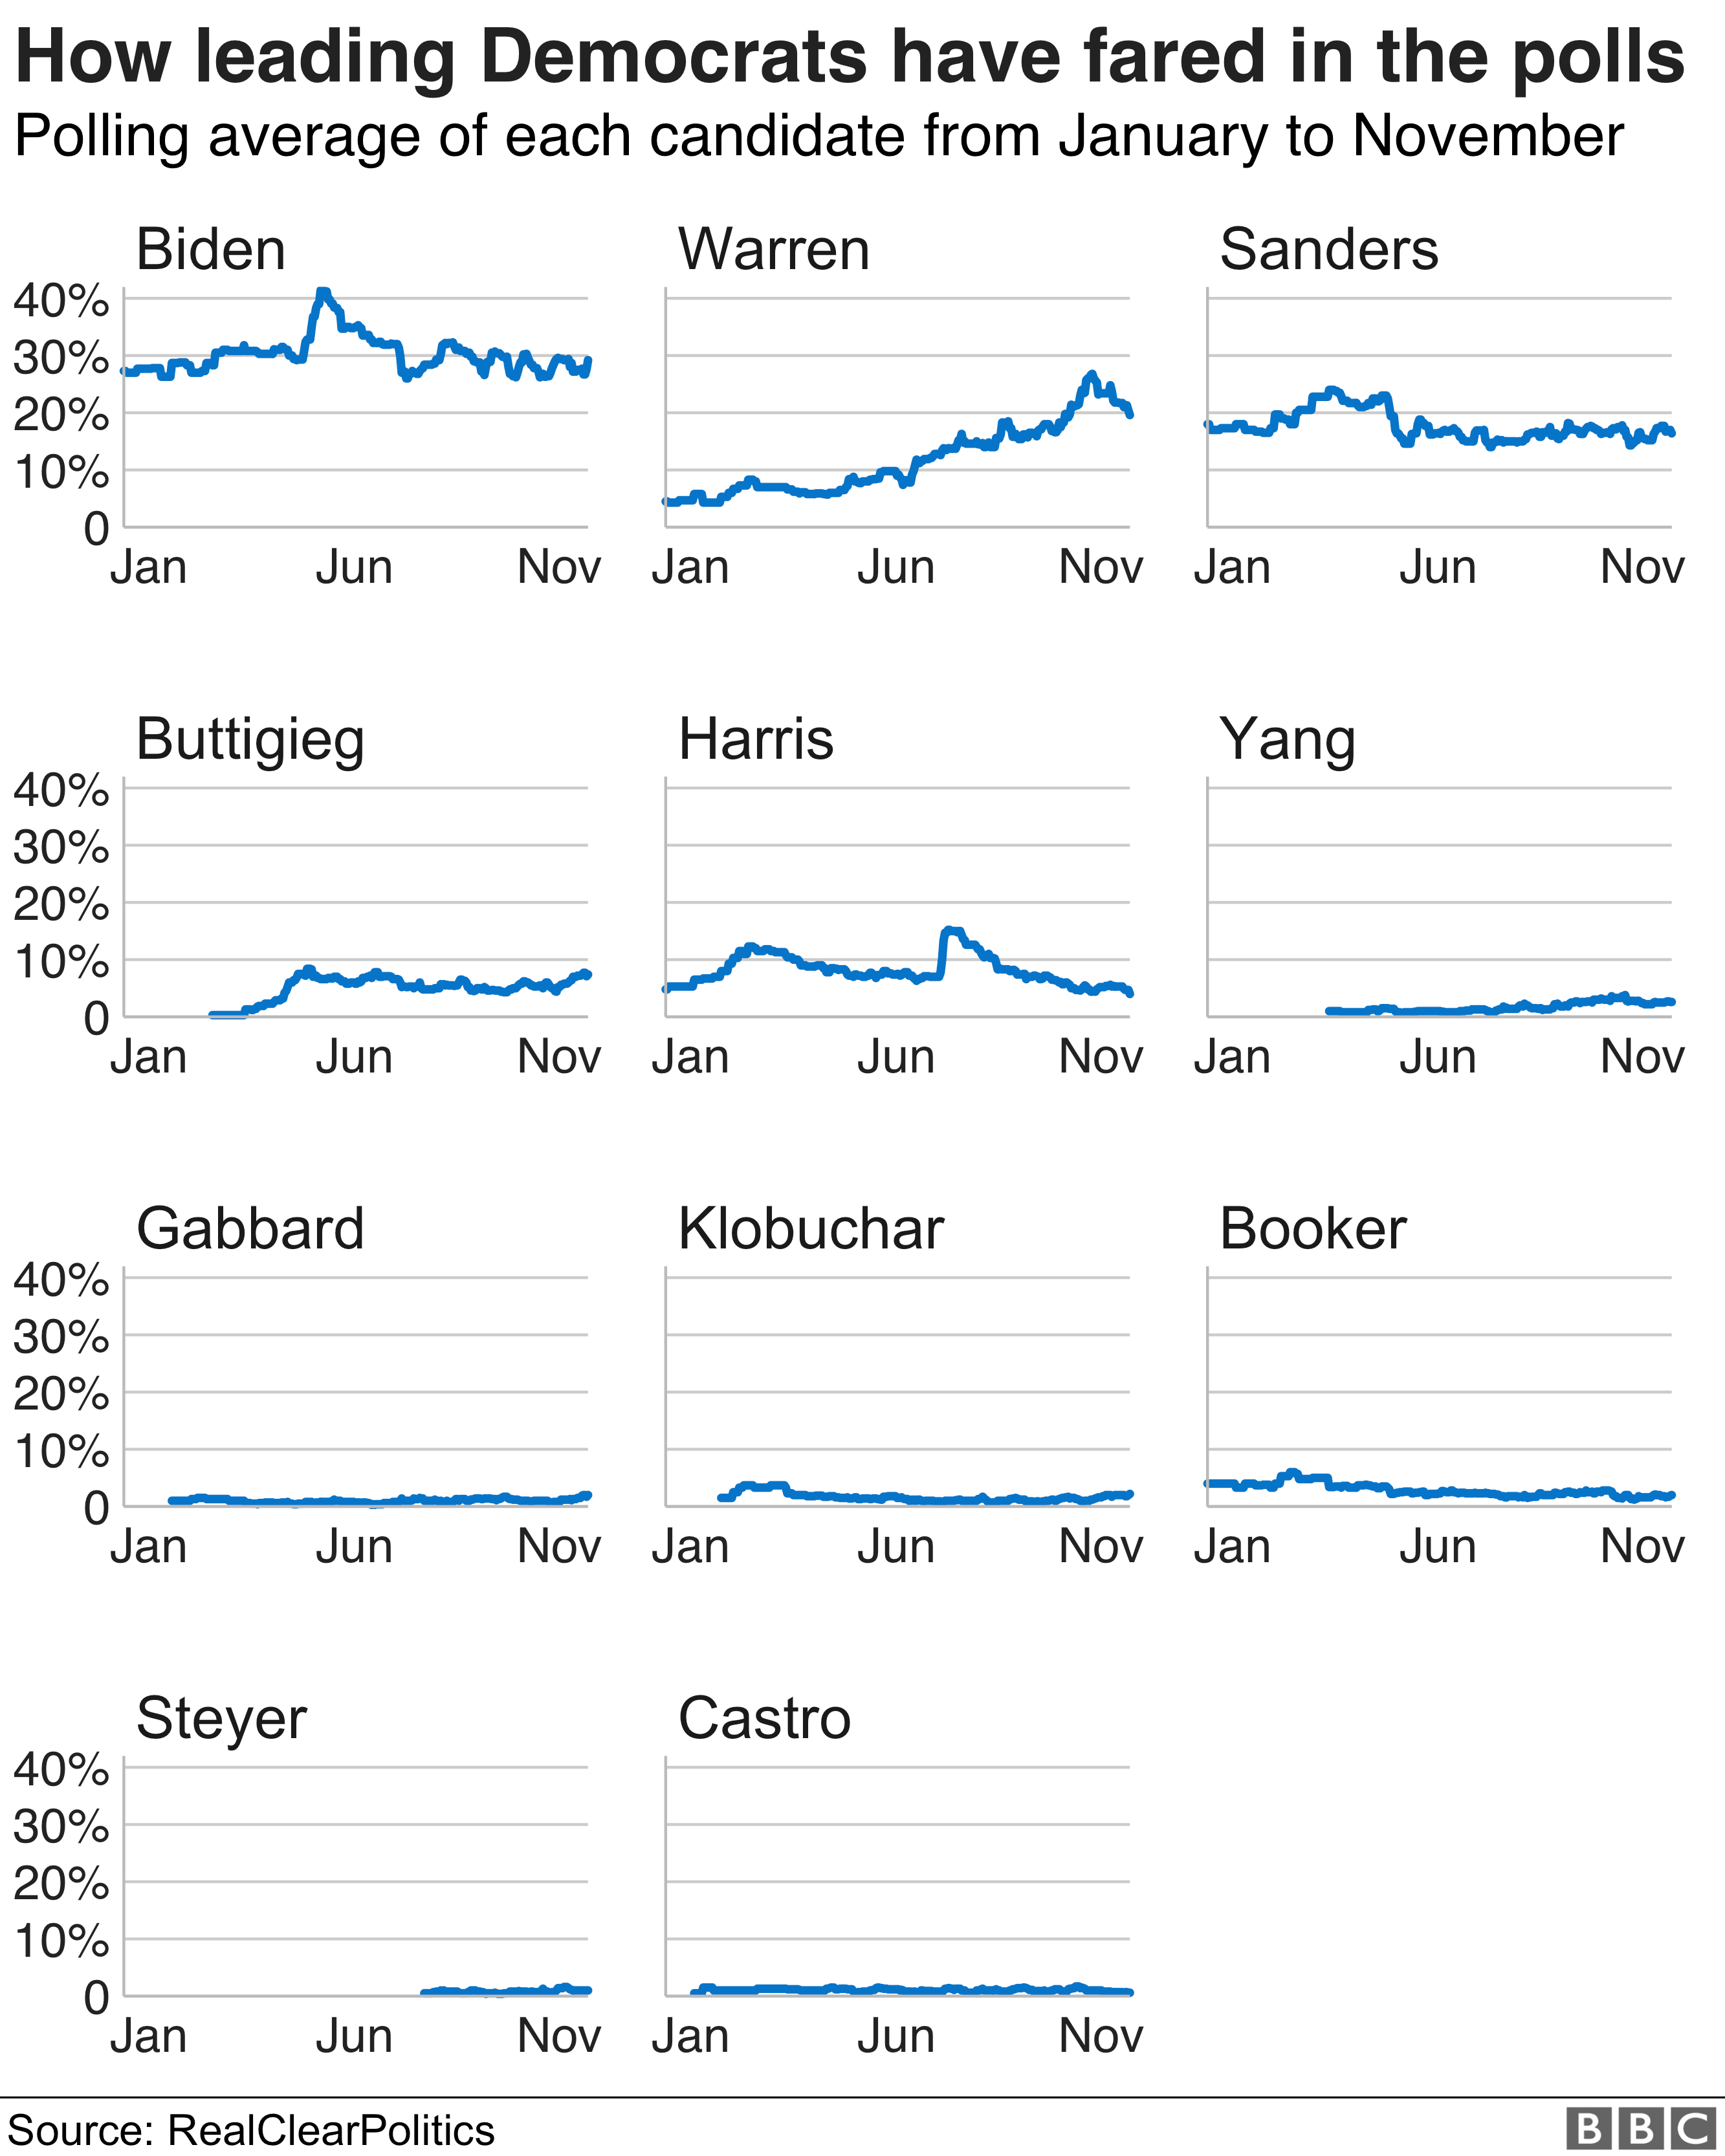 Chart showing how each of the leading Democratic candidates have fared in the polls since the beginning of the year. Joe Biden has led the field since January, although Elizabeth Warren hasn't been far behind in recent months